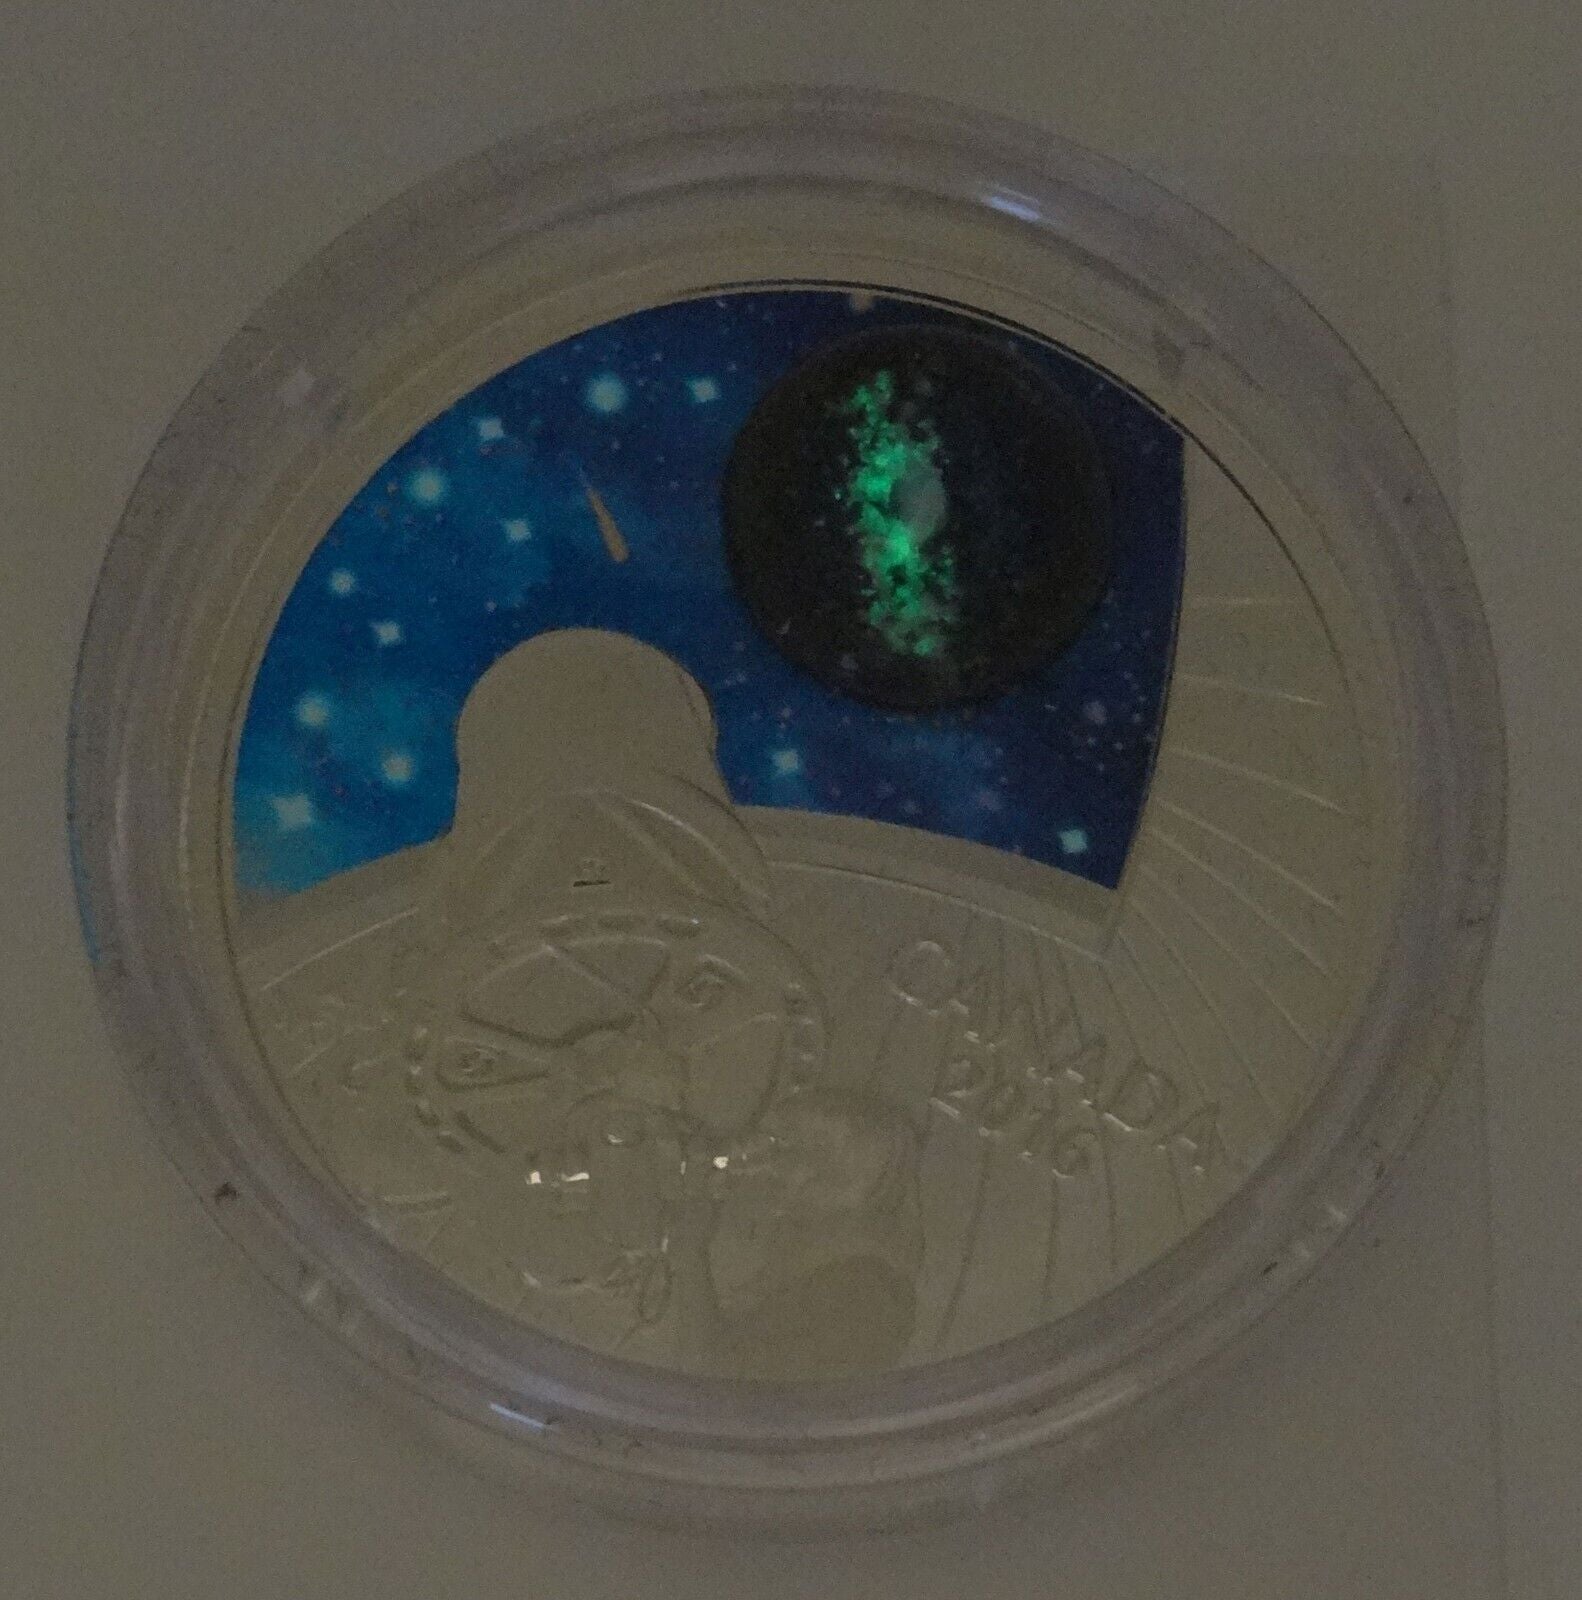 1 Oz Silver Coin 2016 $20 Canada The Universe Glow in the Dark Glass with Opal-classypw.com-1